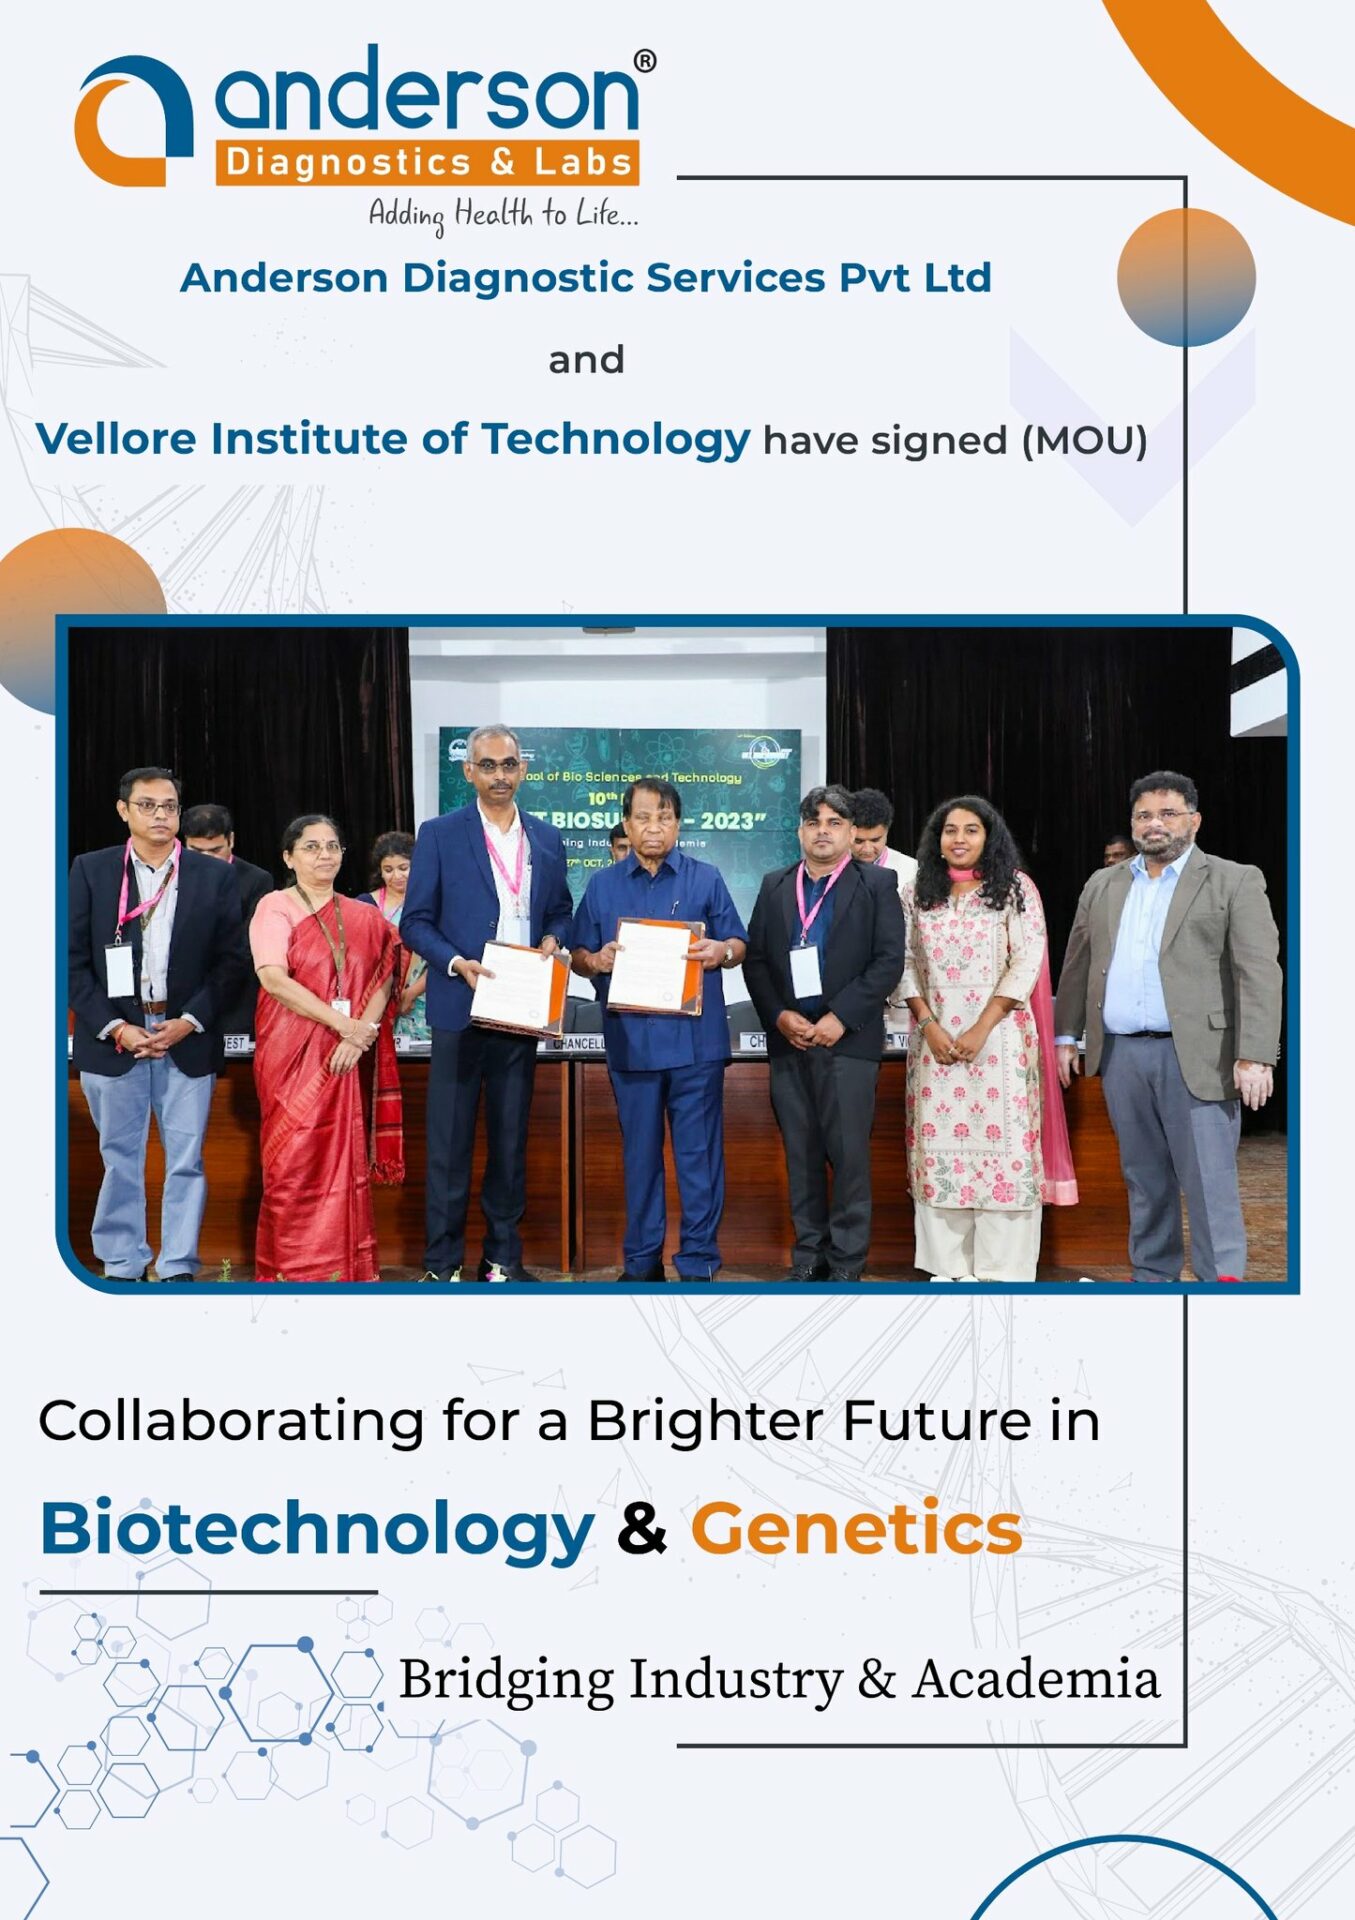 A photo shot at the signing of an official Memorandum of Understanding (MOU) between Anderson Diagnostic Services Pvt Ltd and the Vellore Institute of technology.